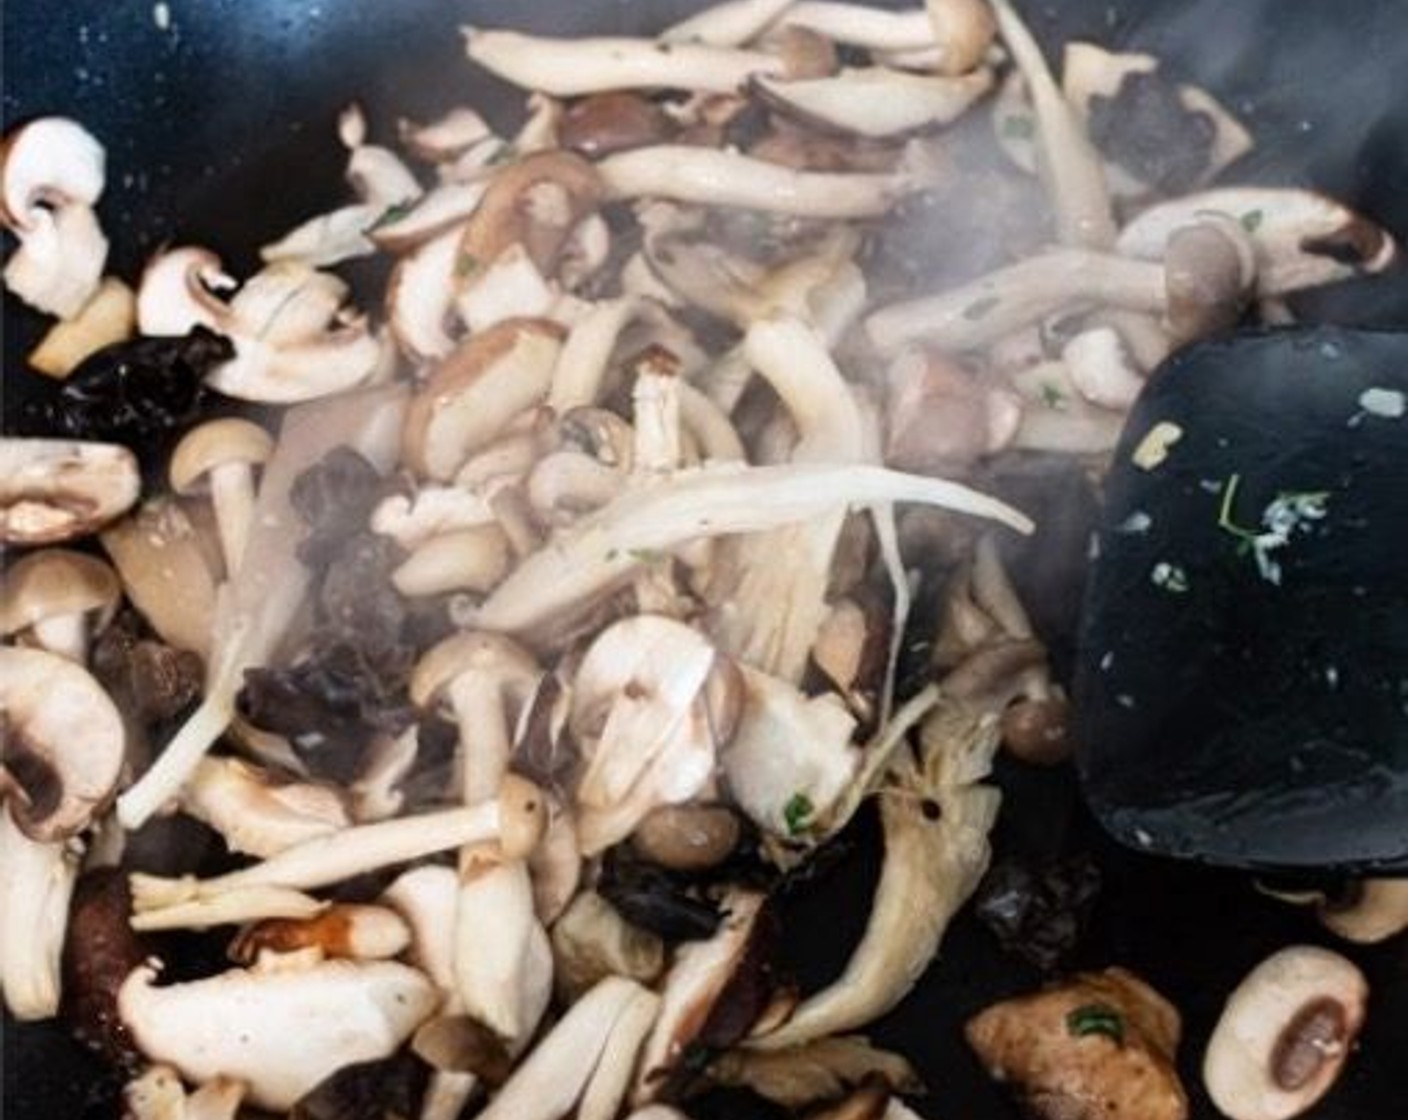 step 2 Add the Wild Mushrooms (2 2/3 cups) and Fresh Thyme (1/4 tsp), then sauté for about 3 minutes, until the mushrooms soften and begin to release their juices.